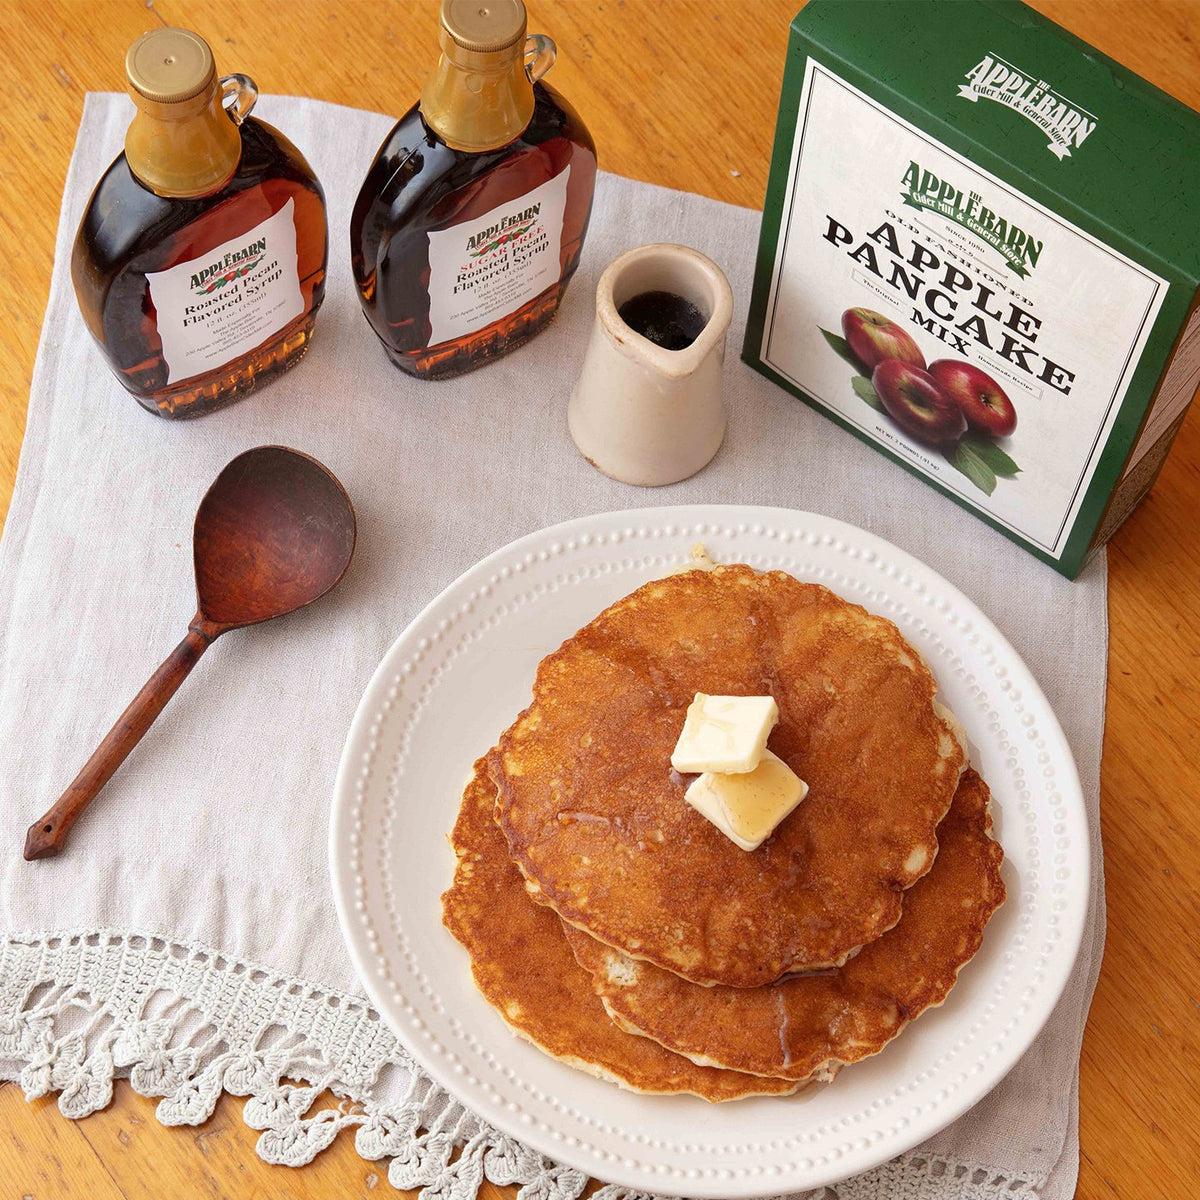 Roasted pecan flavored syrup on apple pancakes